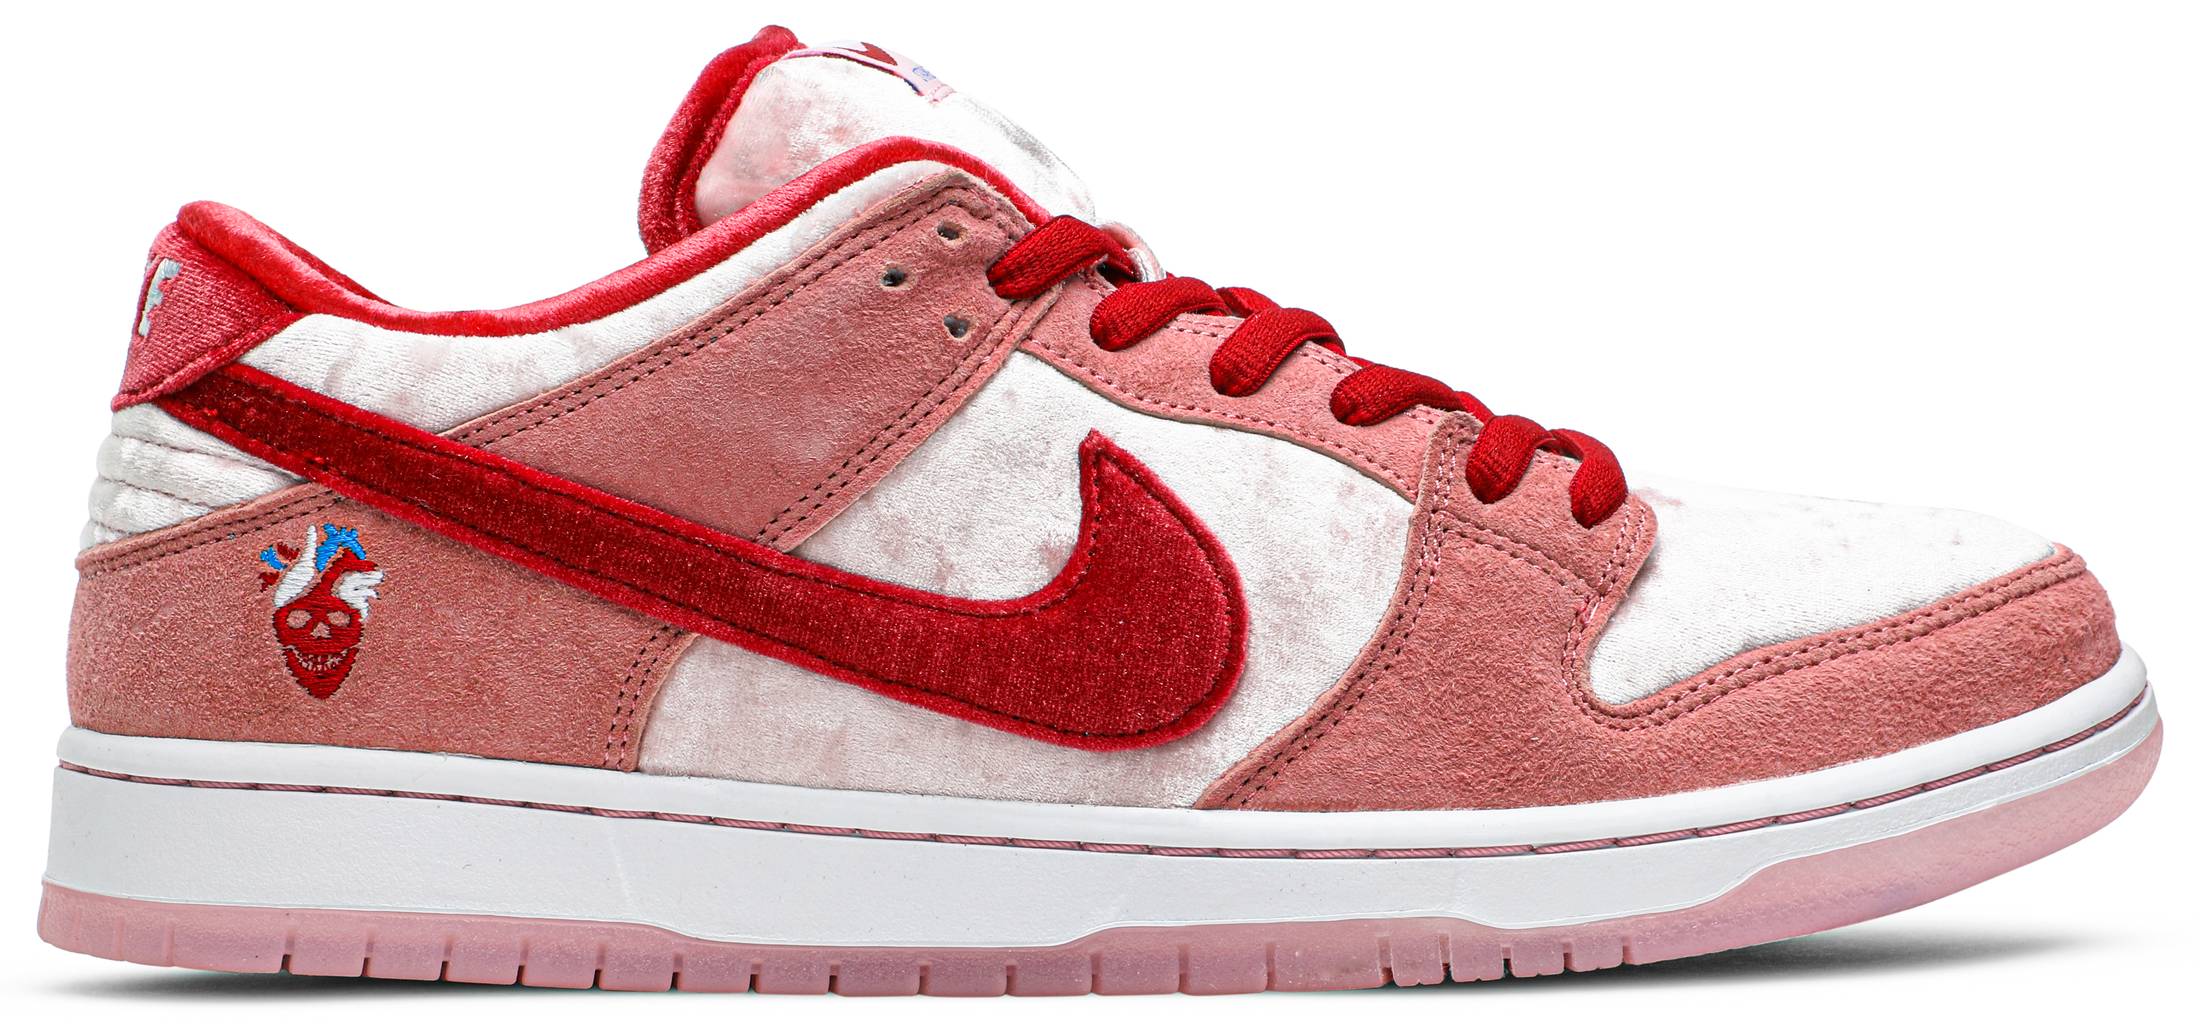 StrangeLove x Nike Dunk Low SB Valentine's Day – Sneakers Joint